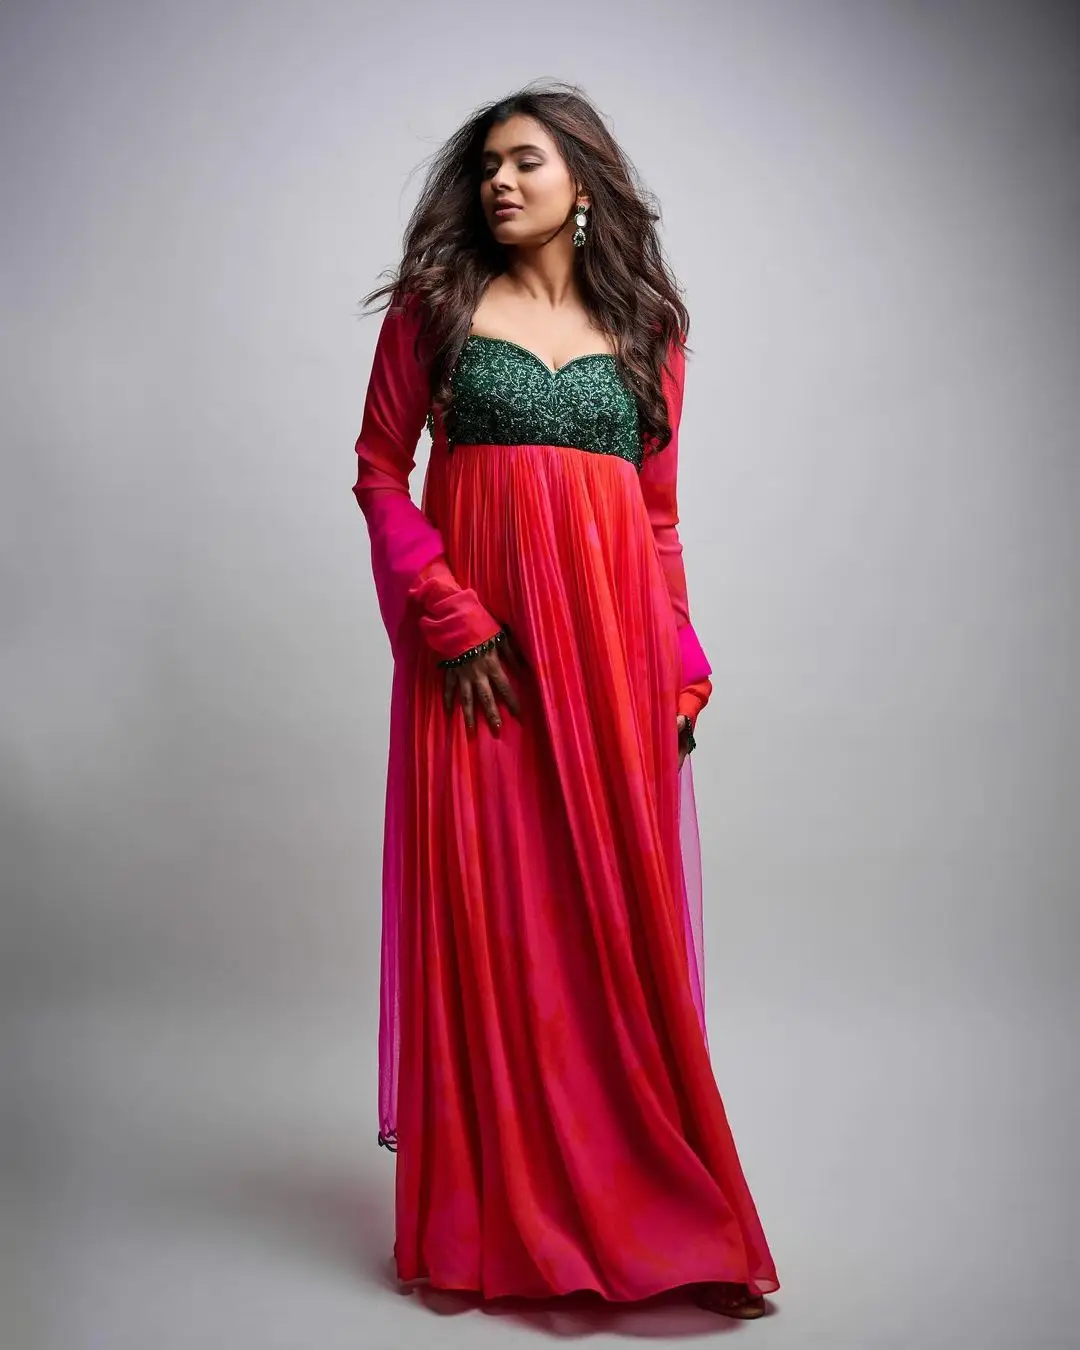 INDIAN ACTRESS HEBAH PATEL IMAGES IN RED GOWN 3